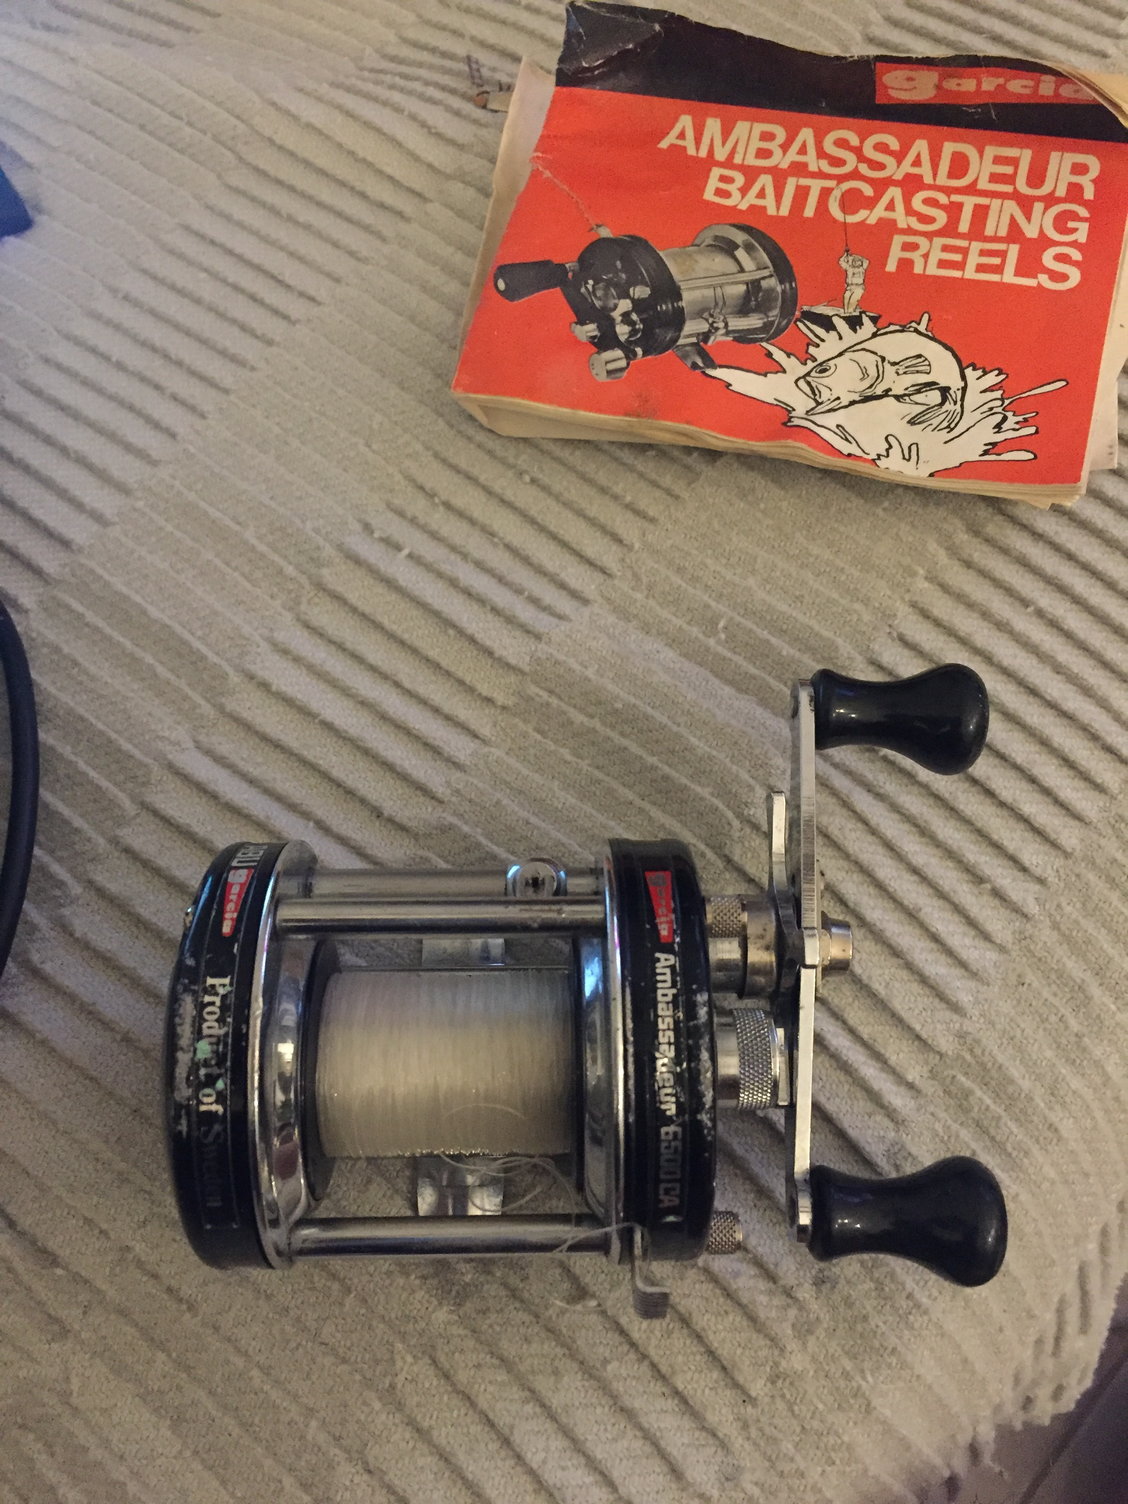 Vintage Abu Garcia Reels The Hull Truth Boating And Fishing Forum